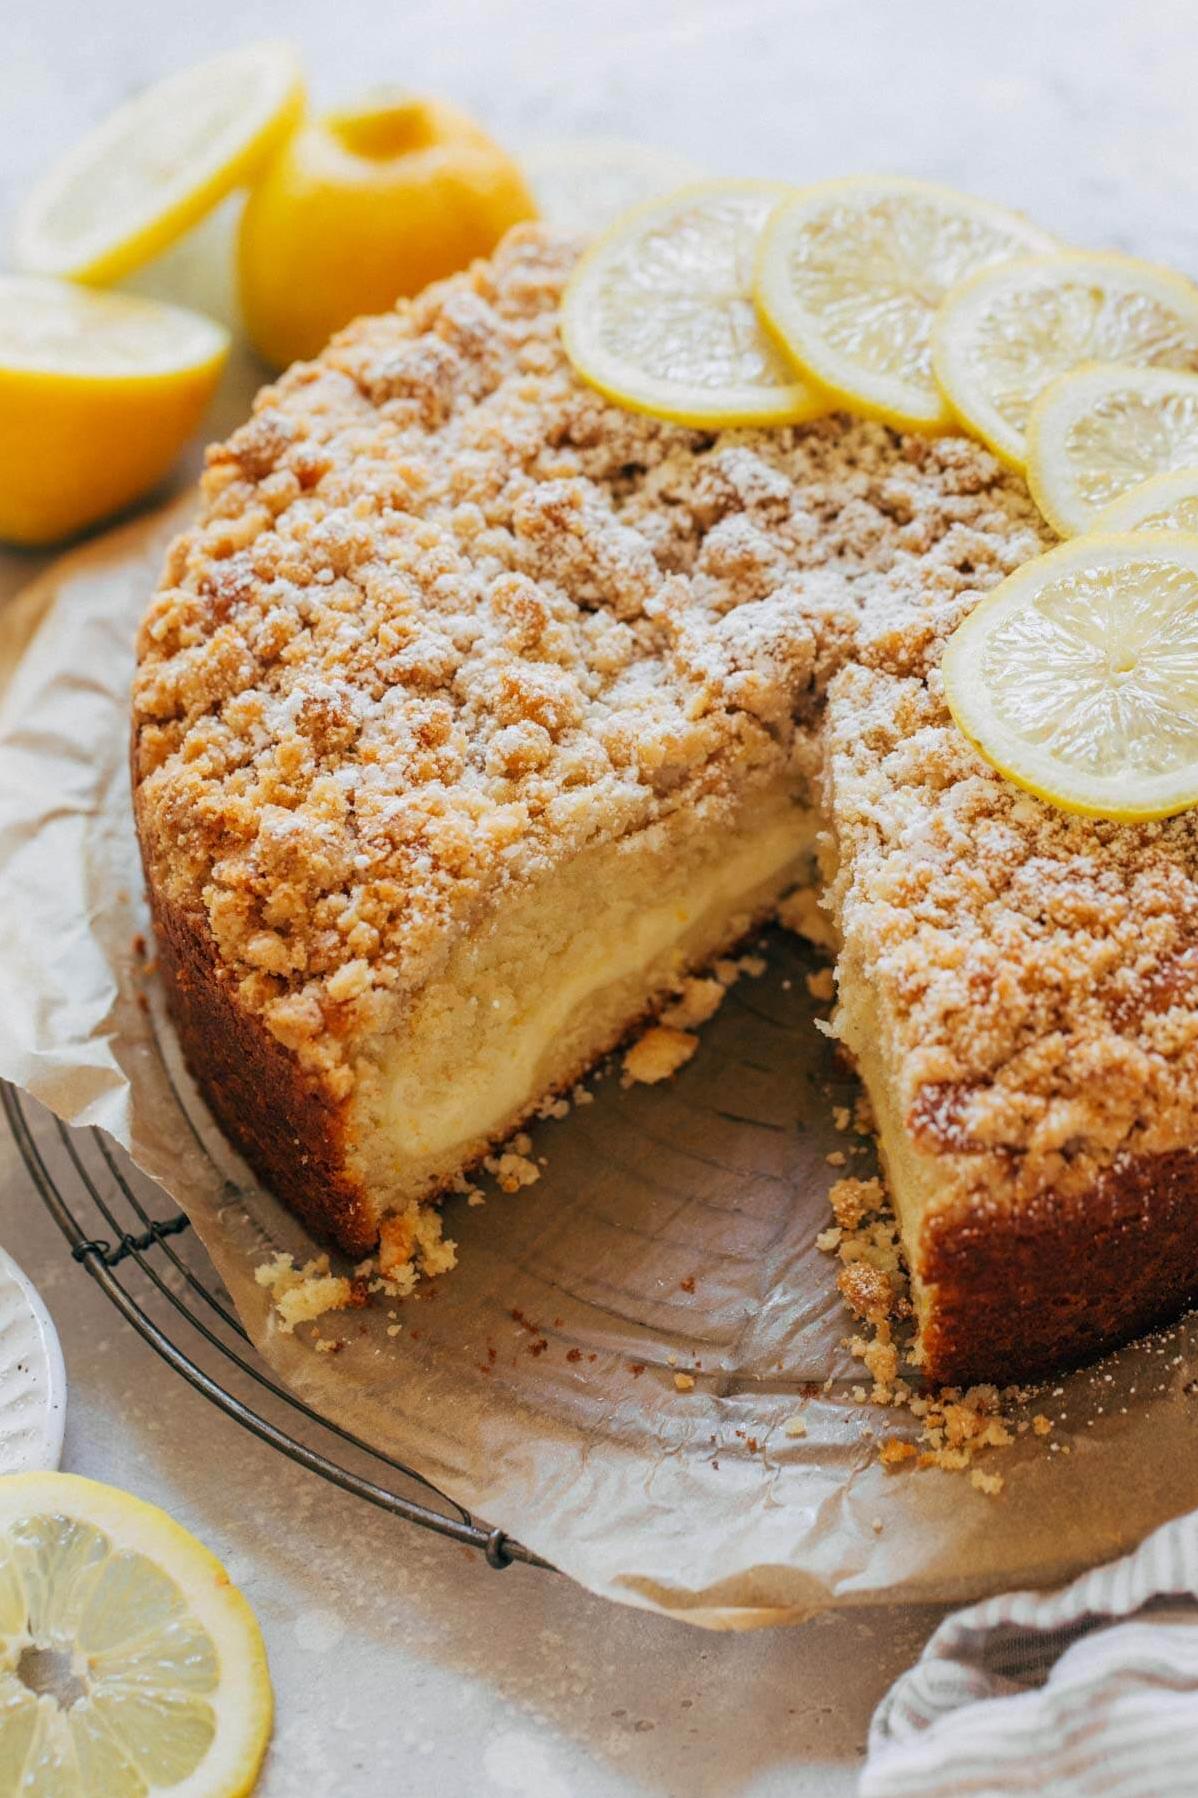  Who knew coffee cake could be so zesty?